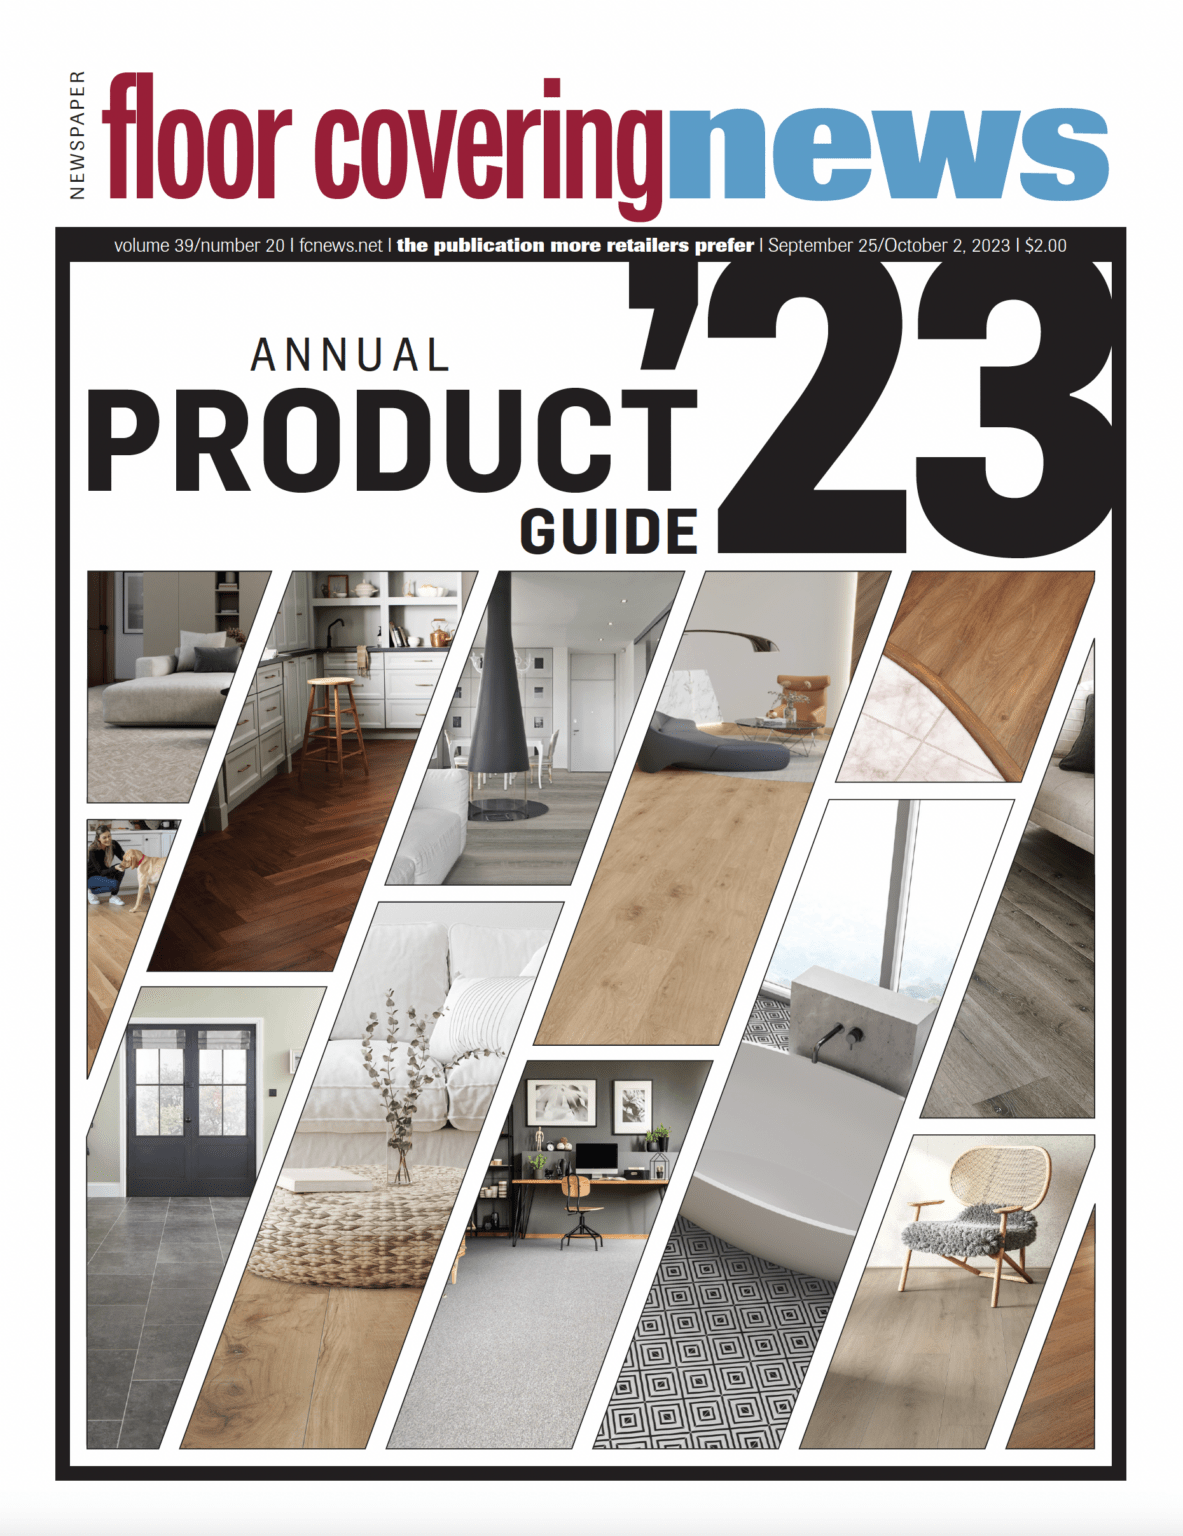 Annual Flooring Product Guide 2023 Cover 1183x1536 &nocache=1